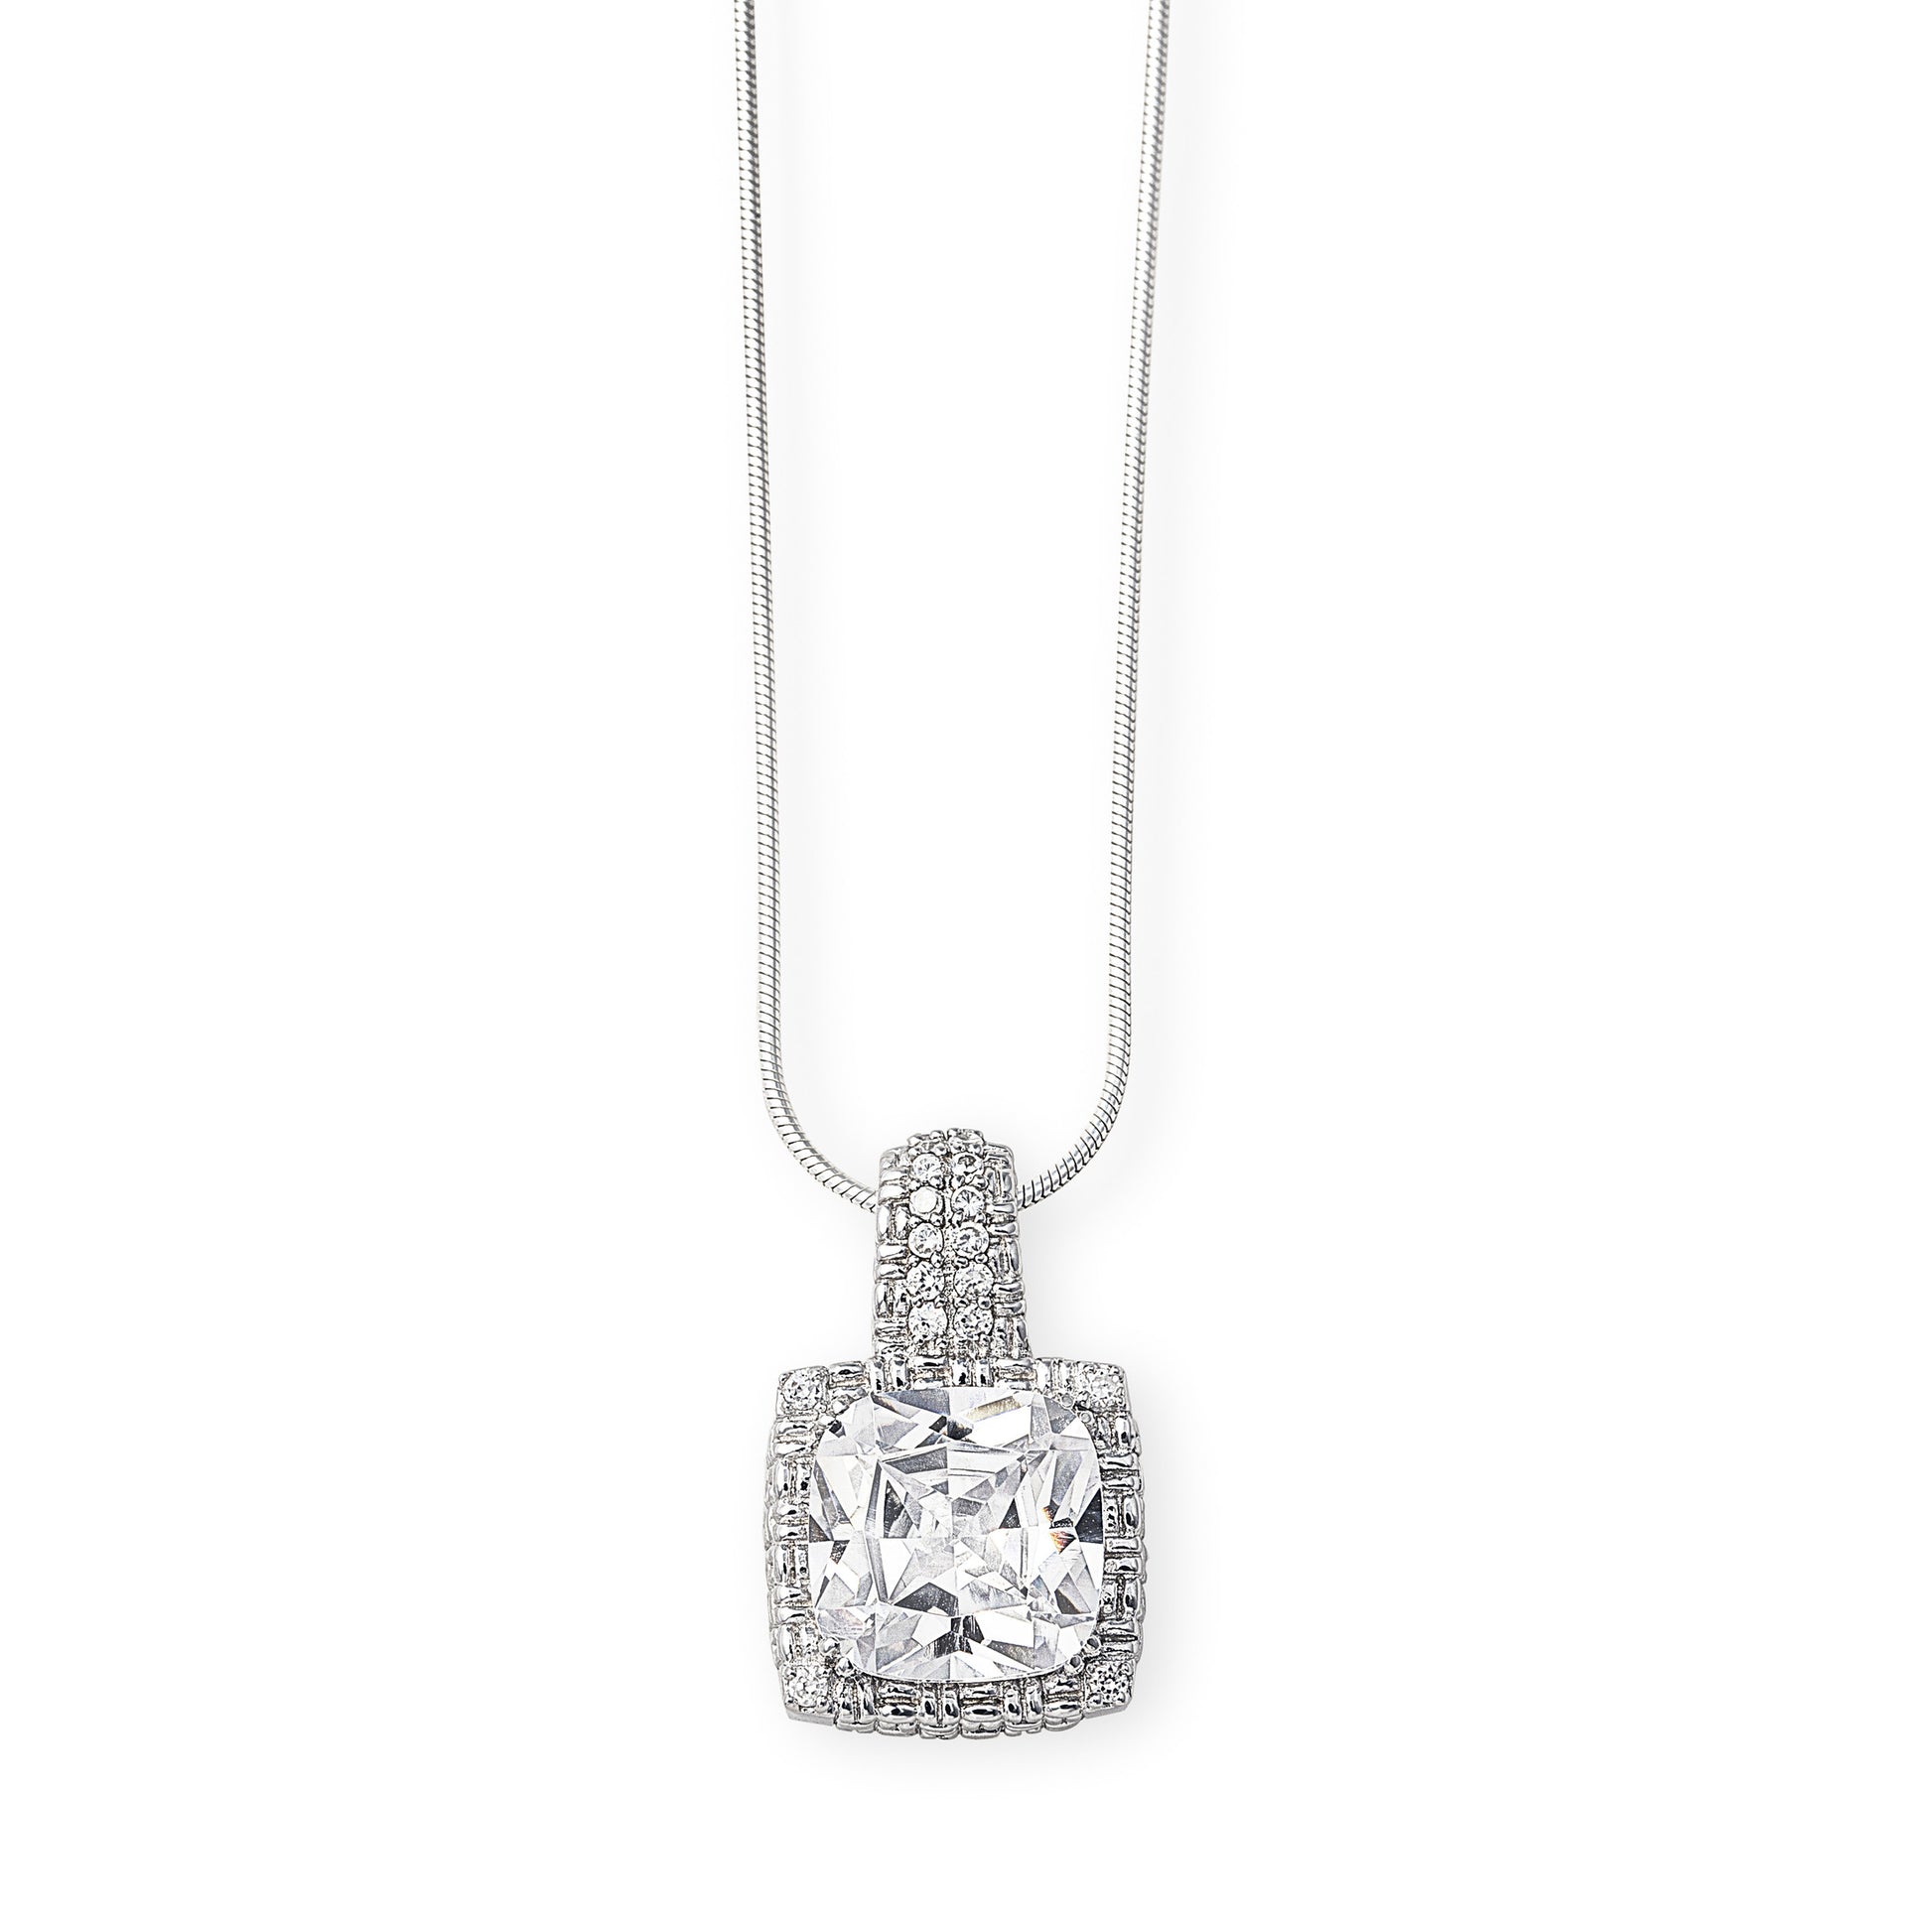 Parisian-inspired Regina Necklace in 925 sterling silver with a large princess cut centre cubic zirconia stone surrounded by a woven silver design and small cubic zirconia stones. Luxury jewellery by Bellagio & Co. Worldwide shipping.